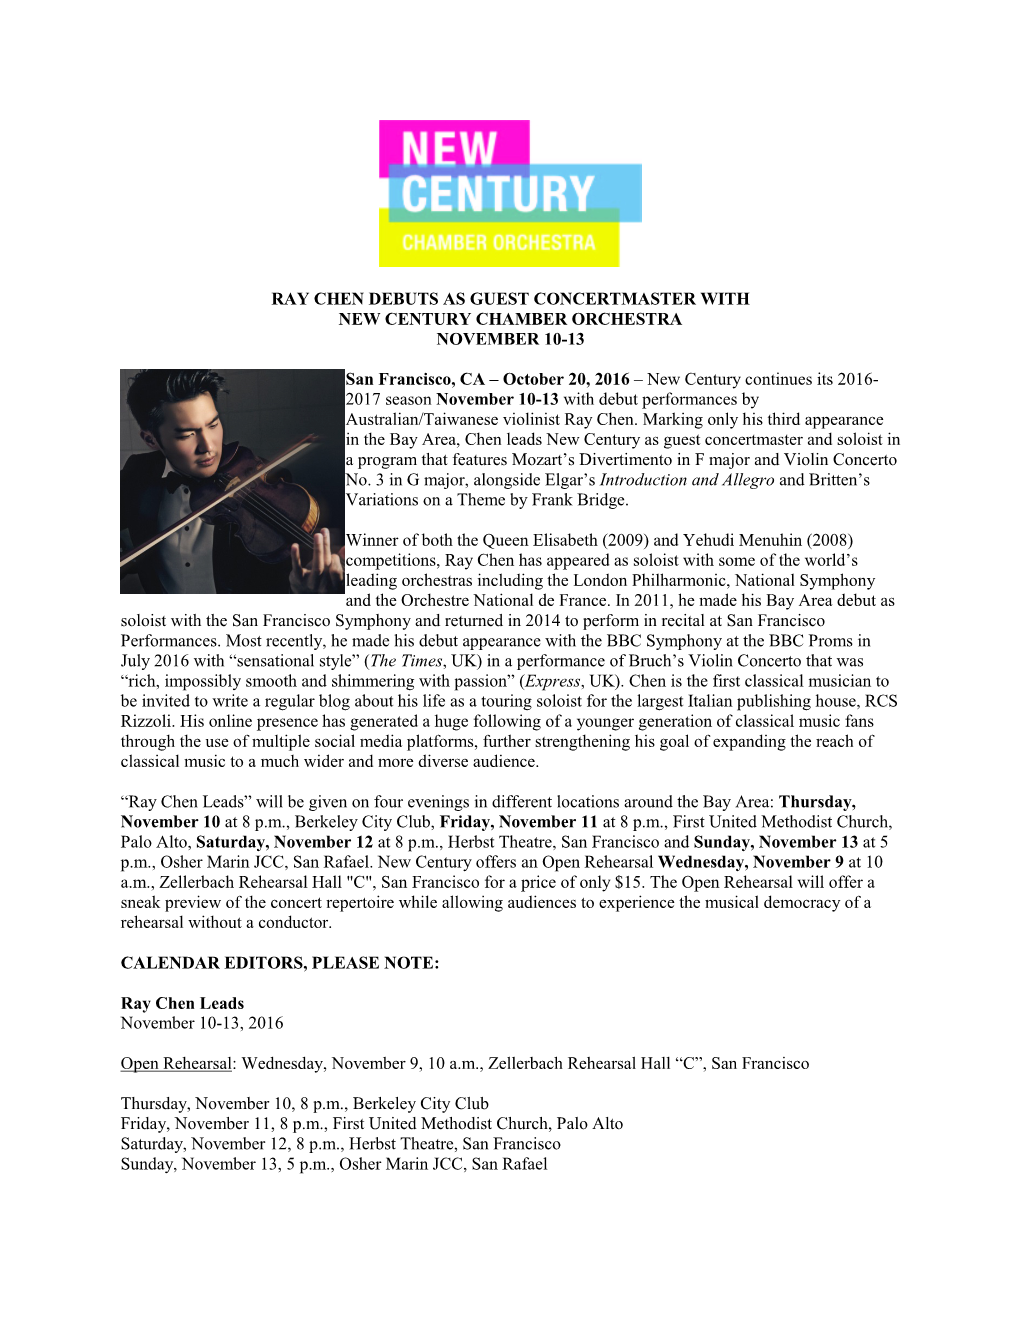 Ray Chen Debuts As Guest Concertmaster with New Century Chamber Orchestra November 10-13